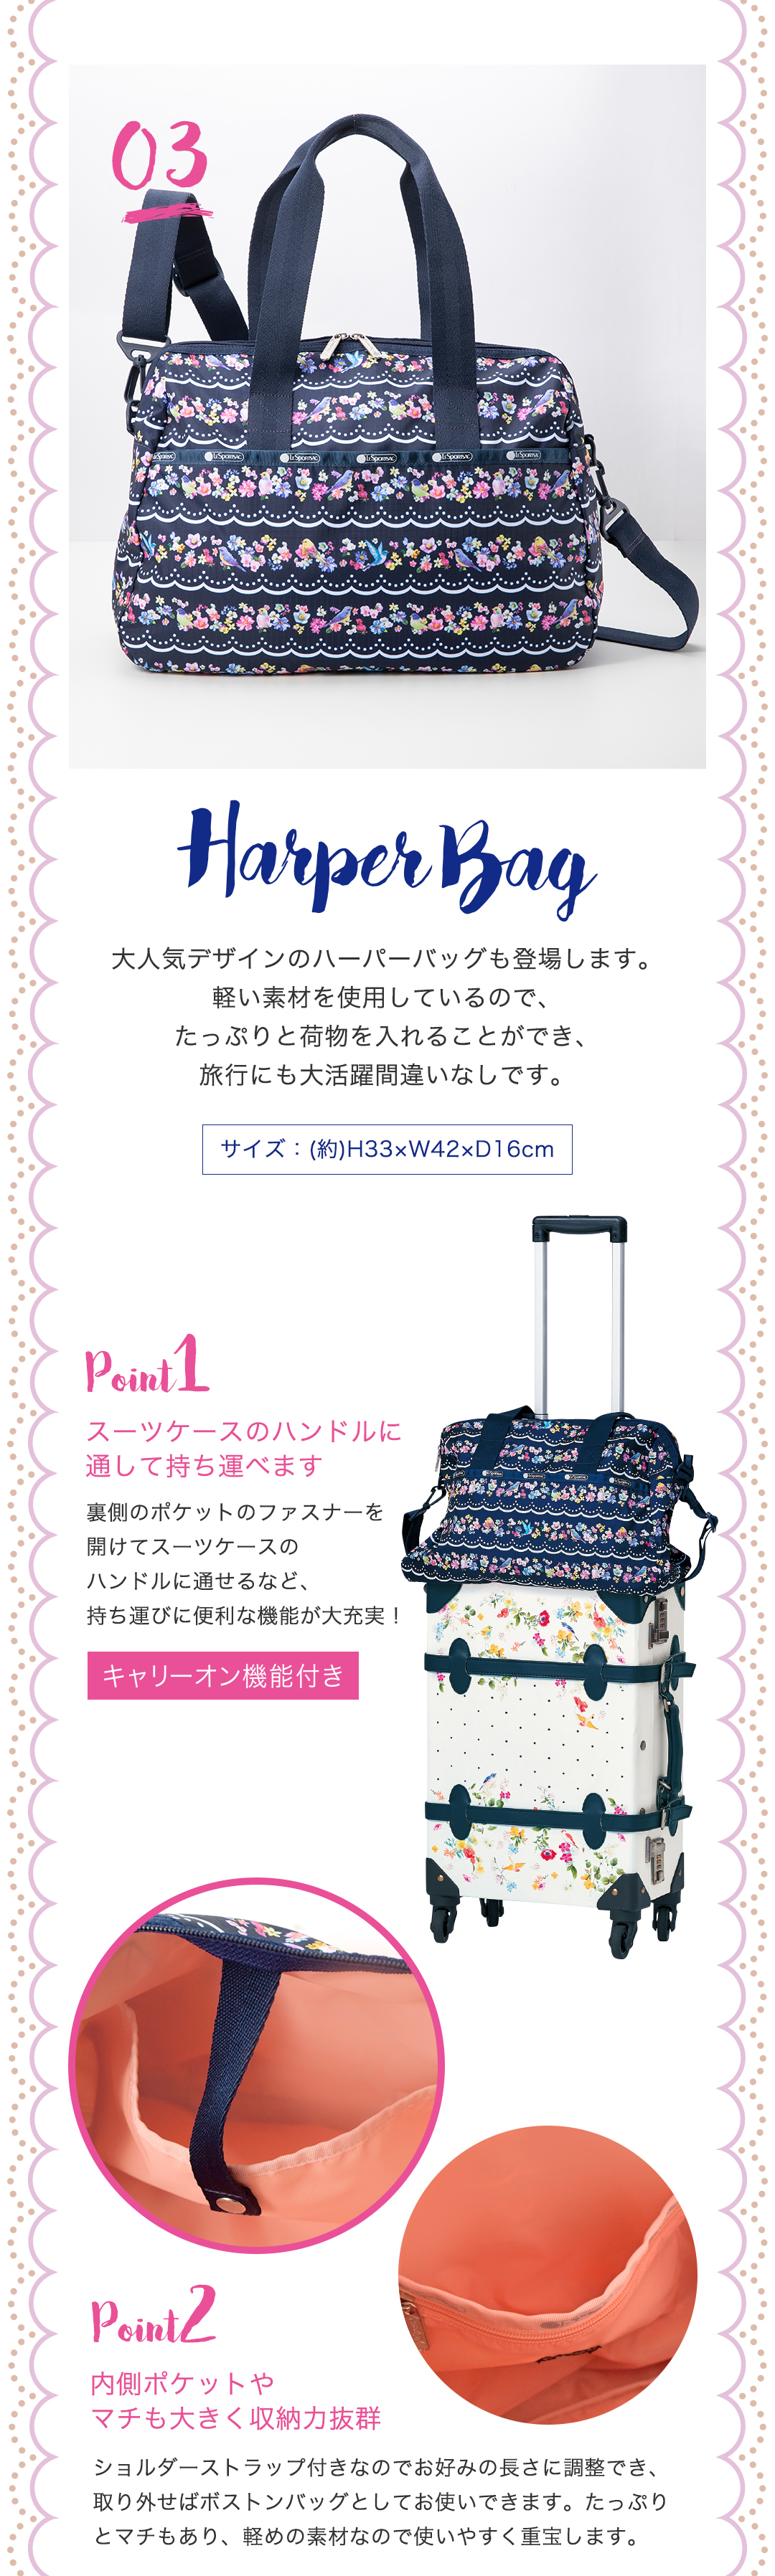 Chesty（チェスティ）LESPORTSAC×Chesty｜公式通販サイト